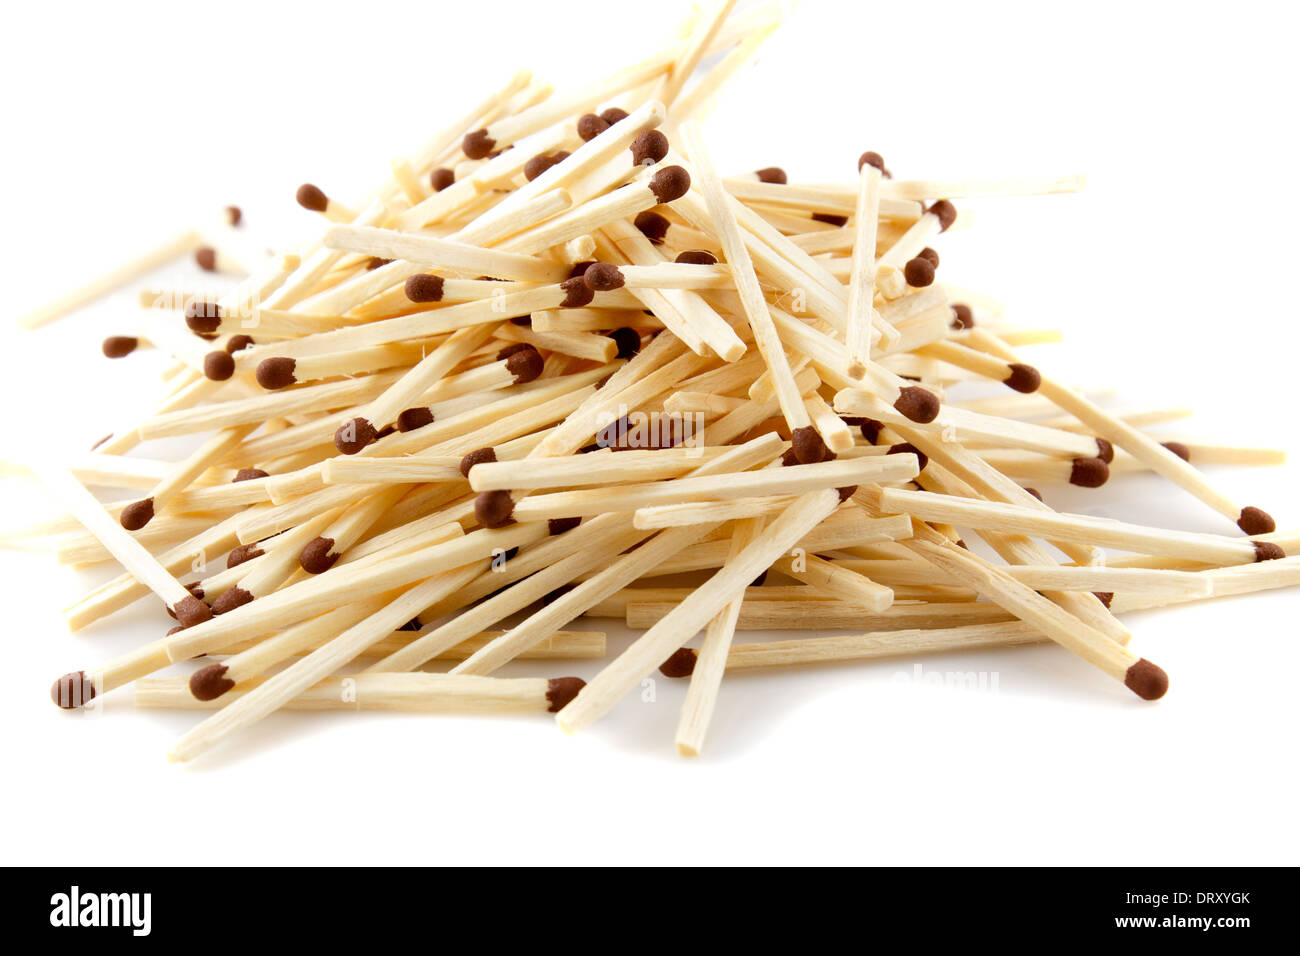 pile of matches on a white background Stock Photo